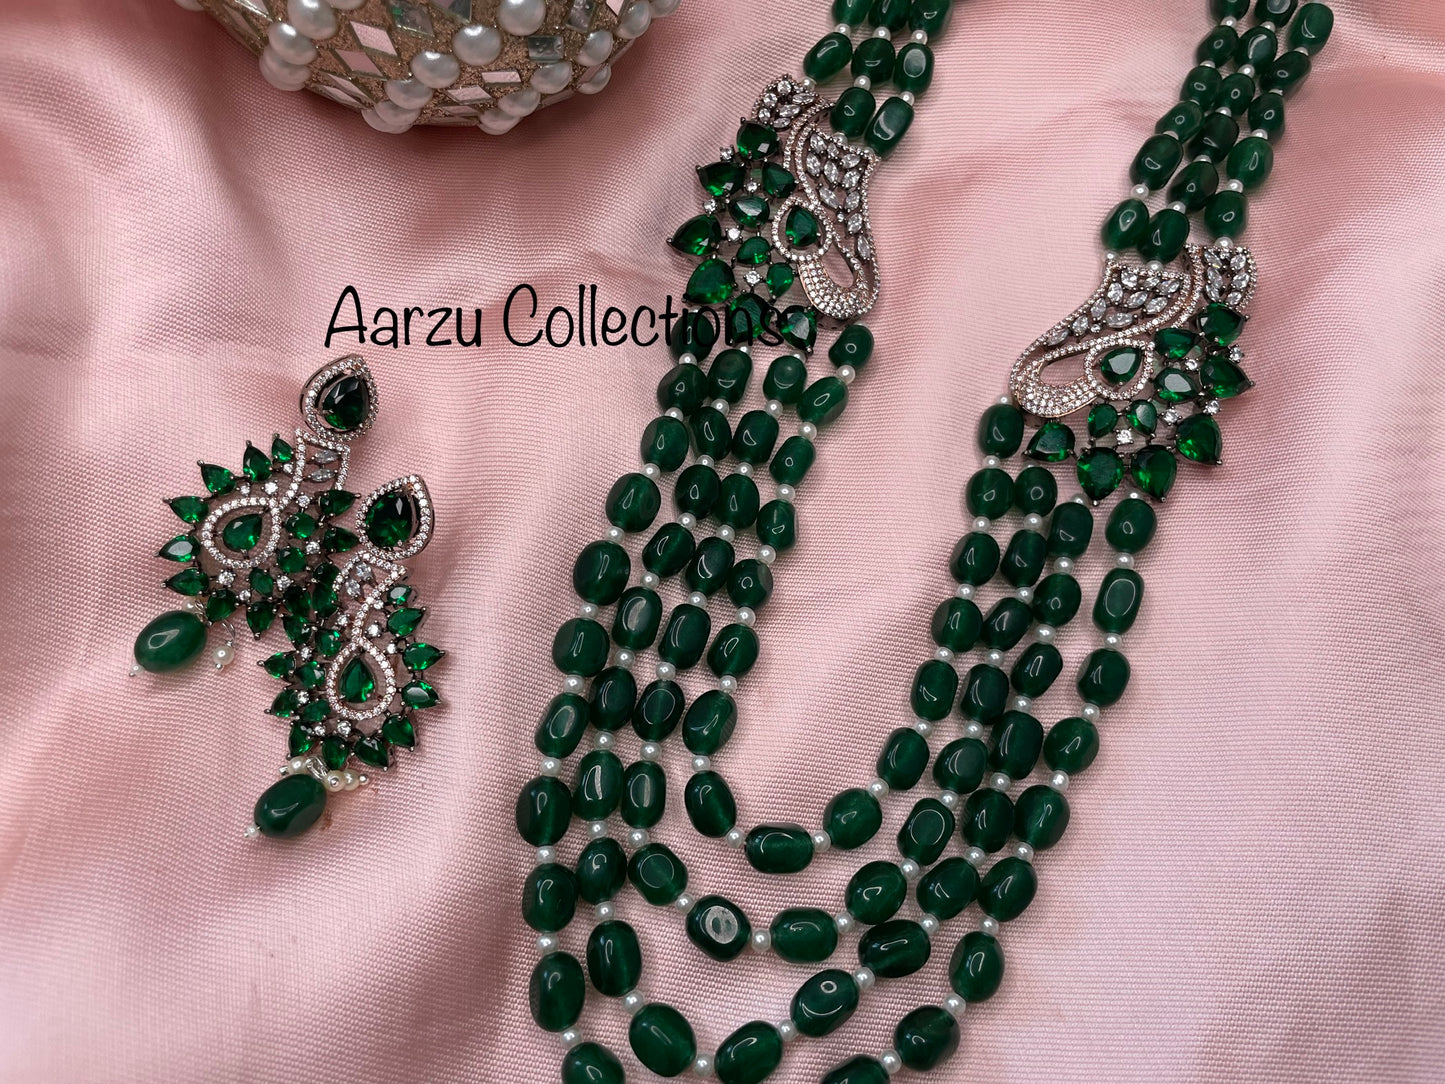 American Diamonds and Emerald glass beads Necklace and Earring Set